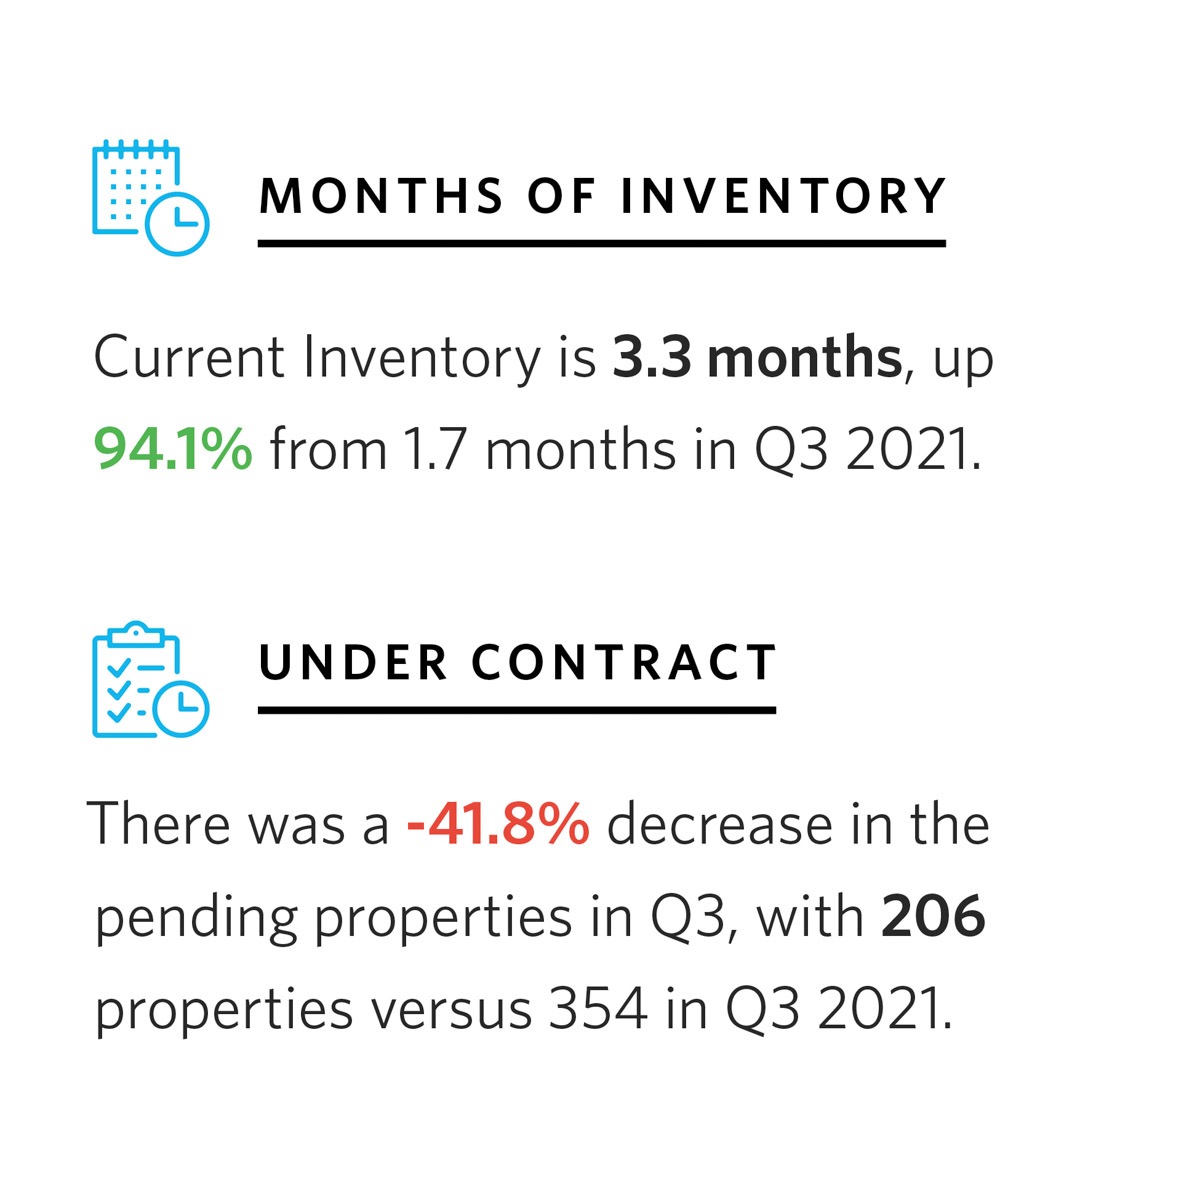 months of inventory and under contract statistics